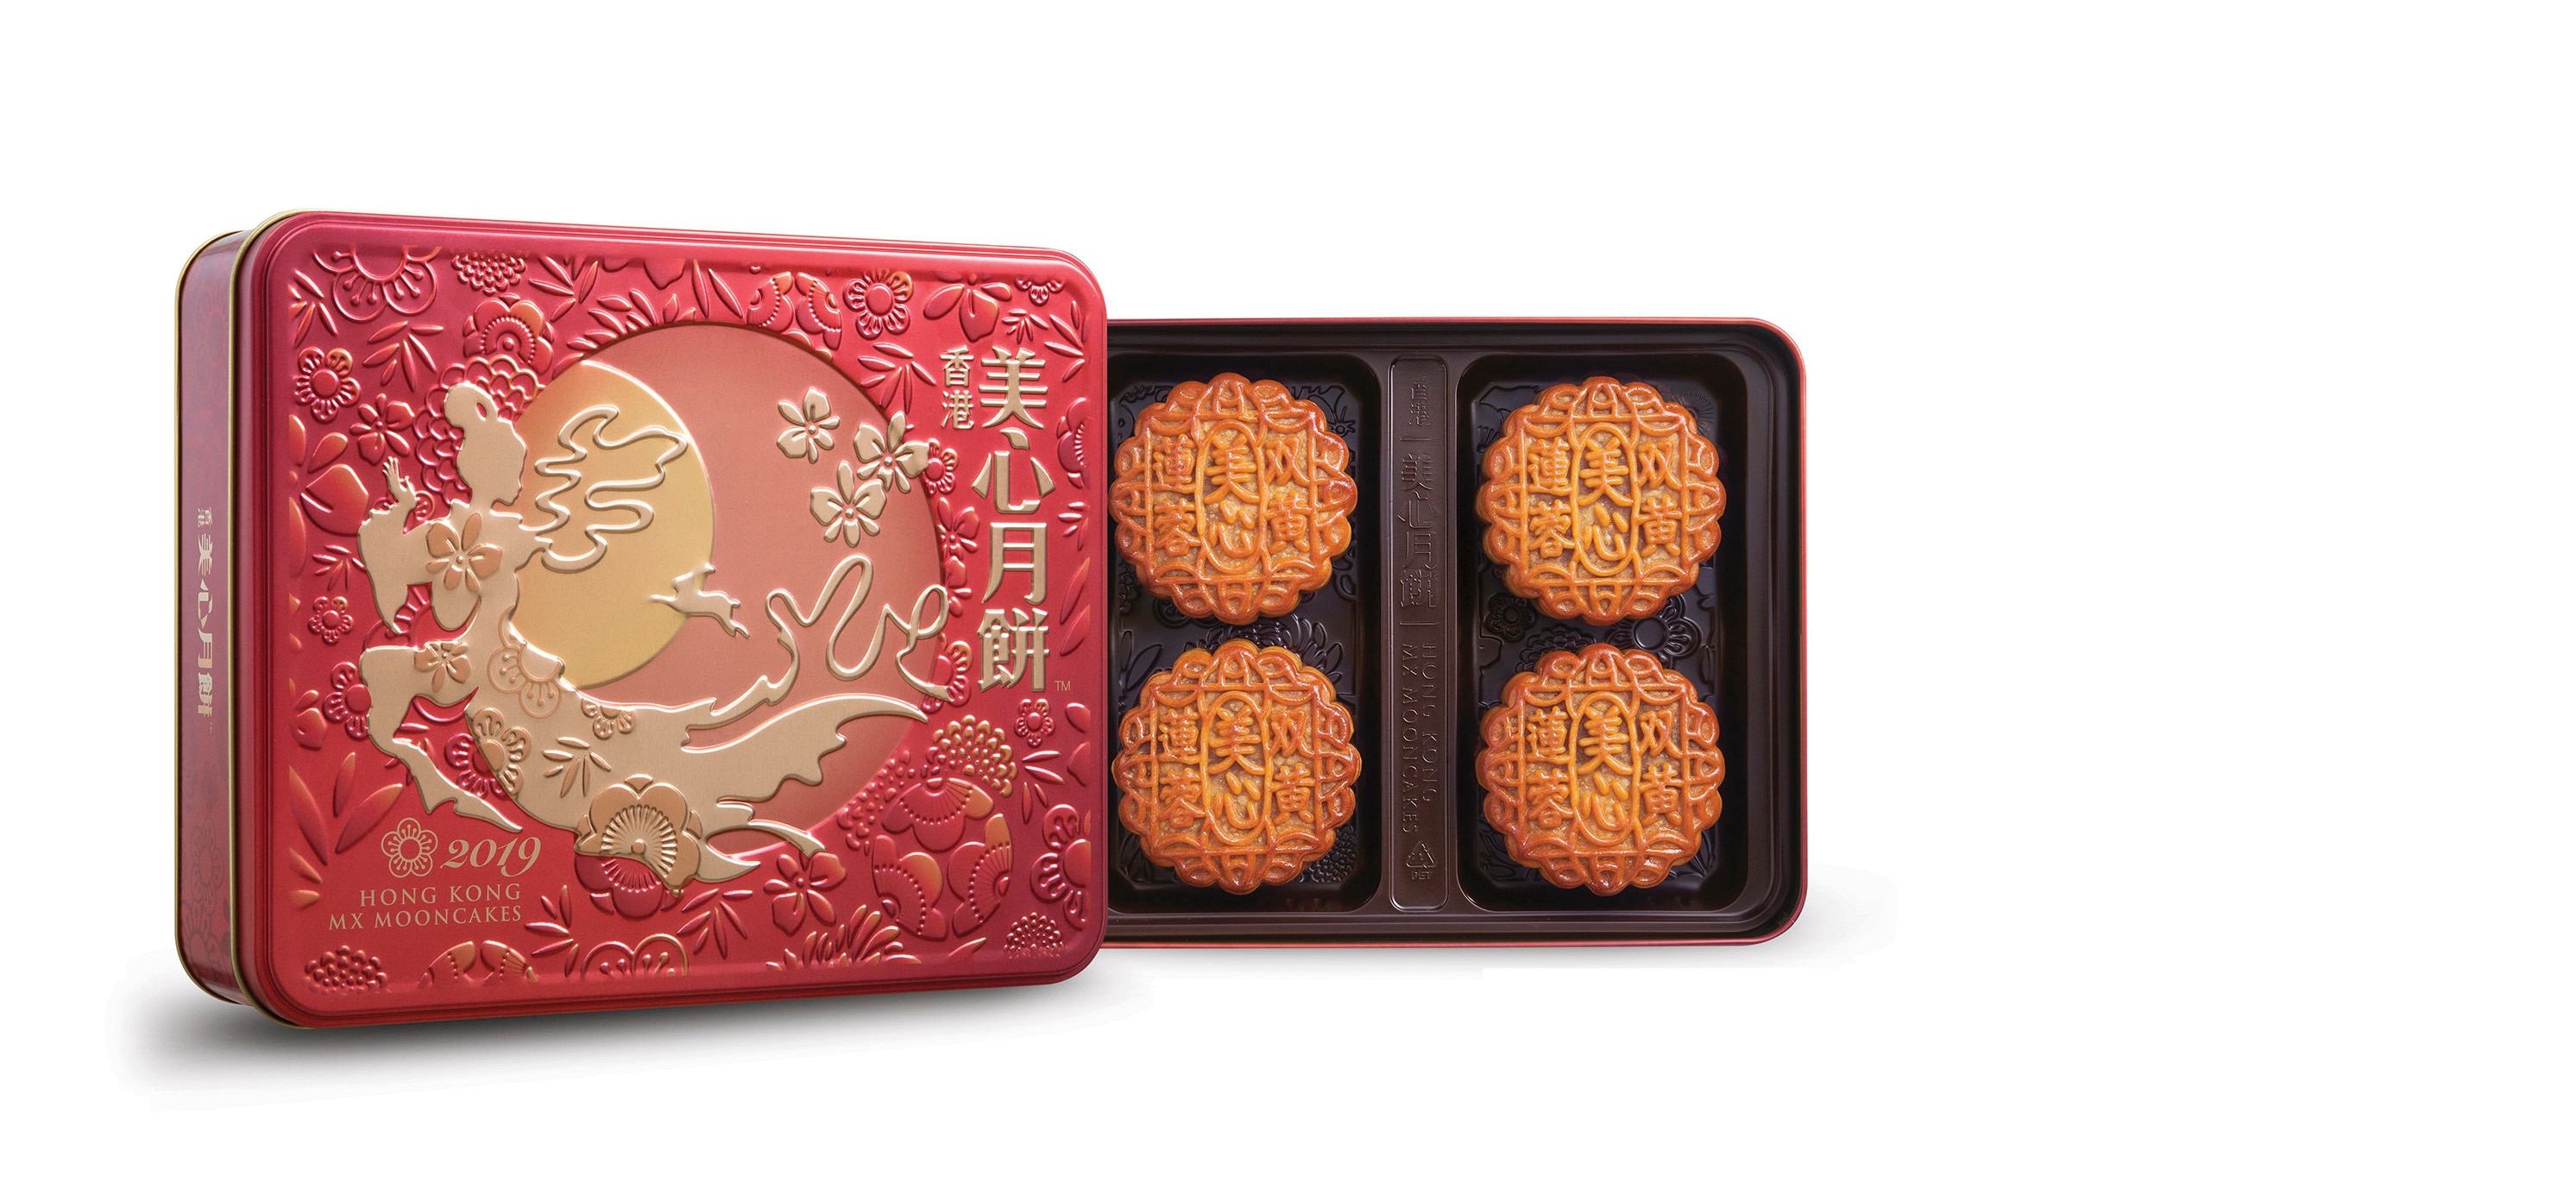 Hong Kong’s MX Mooncake opens pop-up stores for Mid-Autumn Festival 4